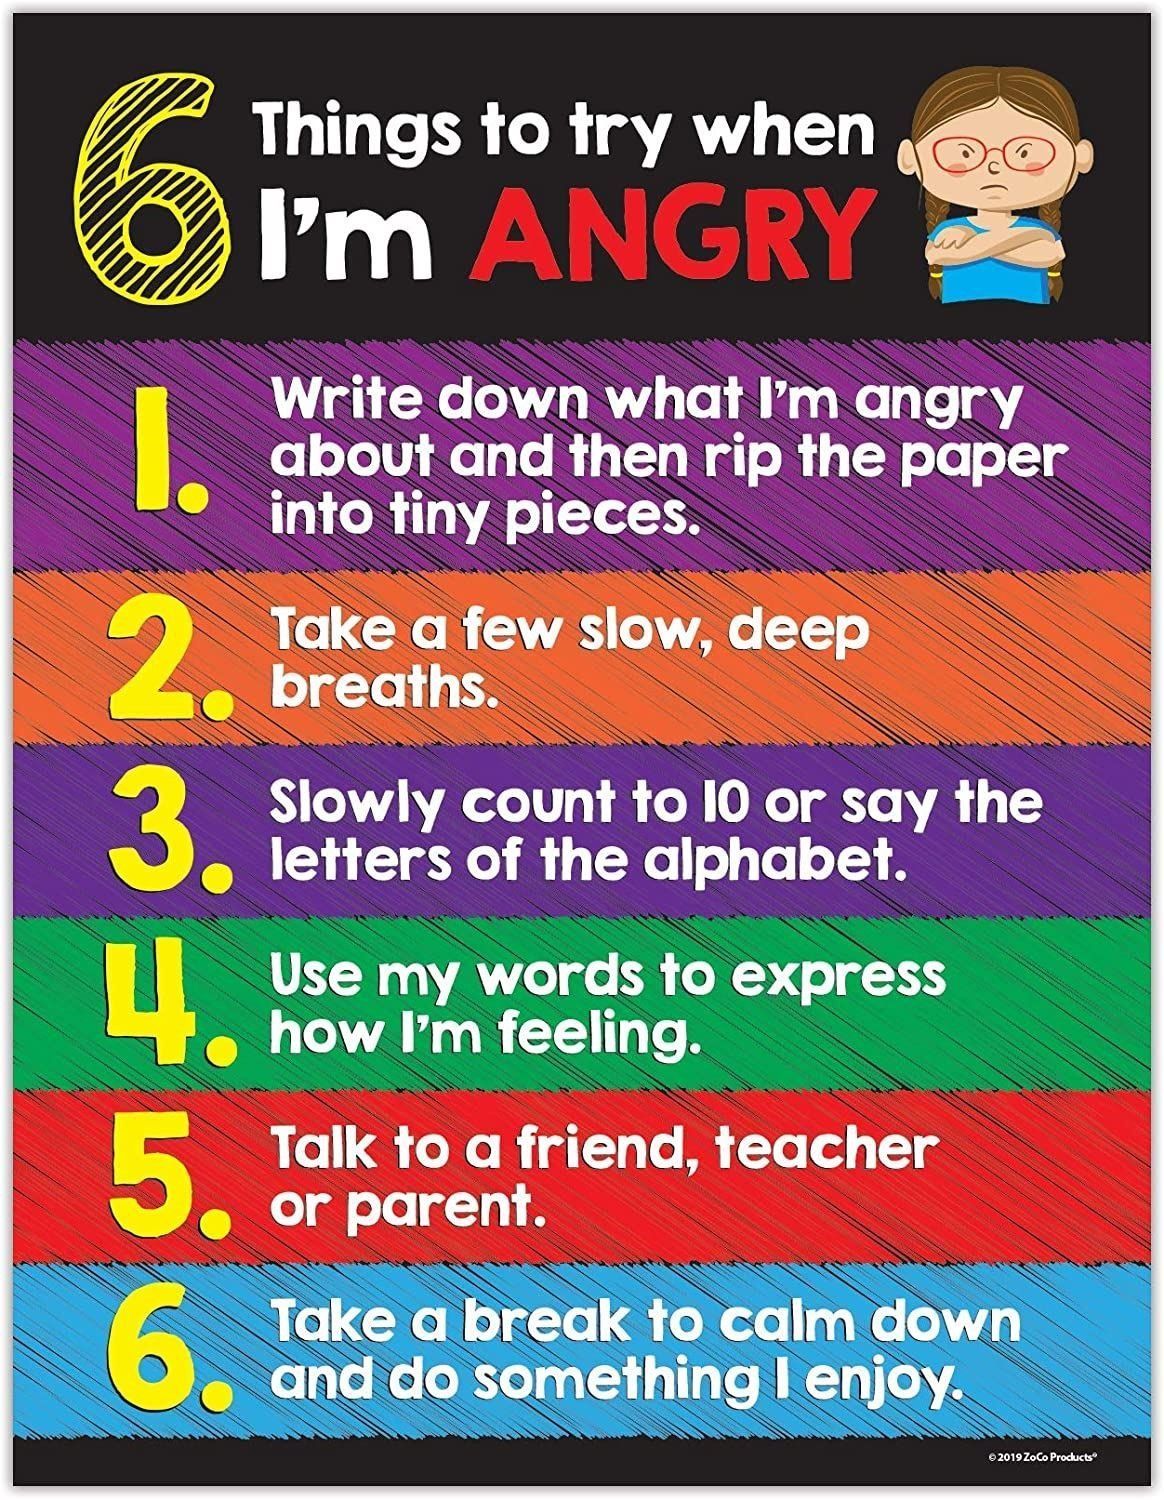 6 Things to try when angry